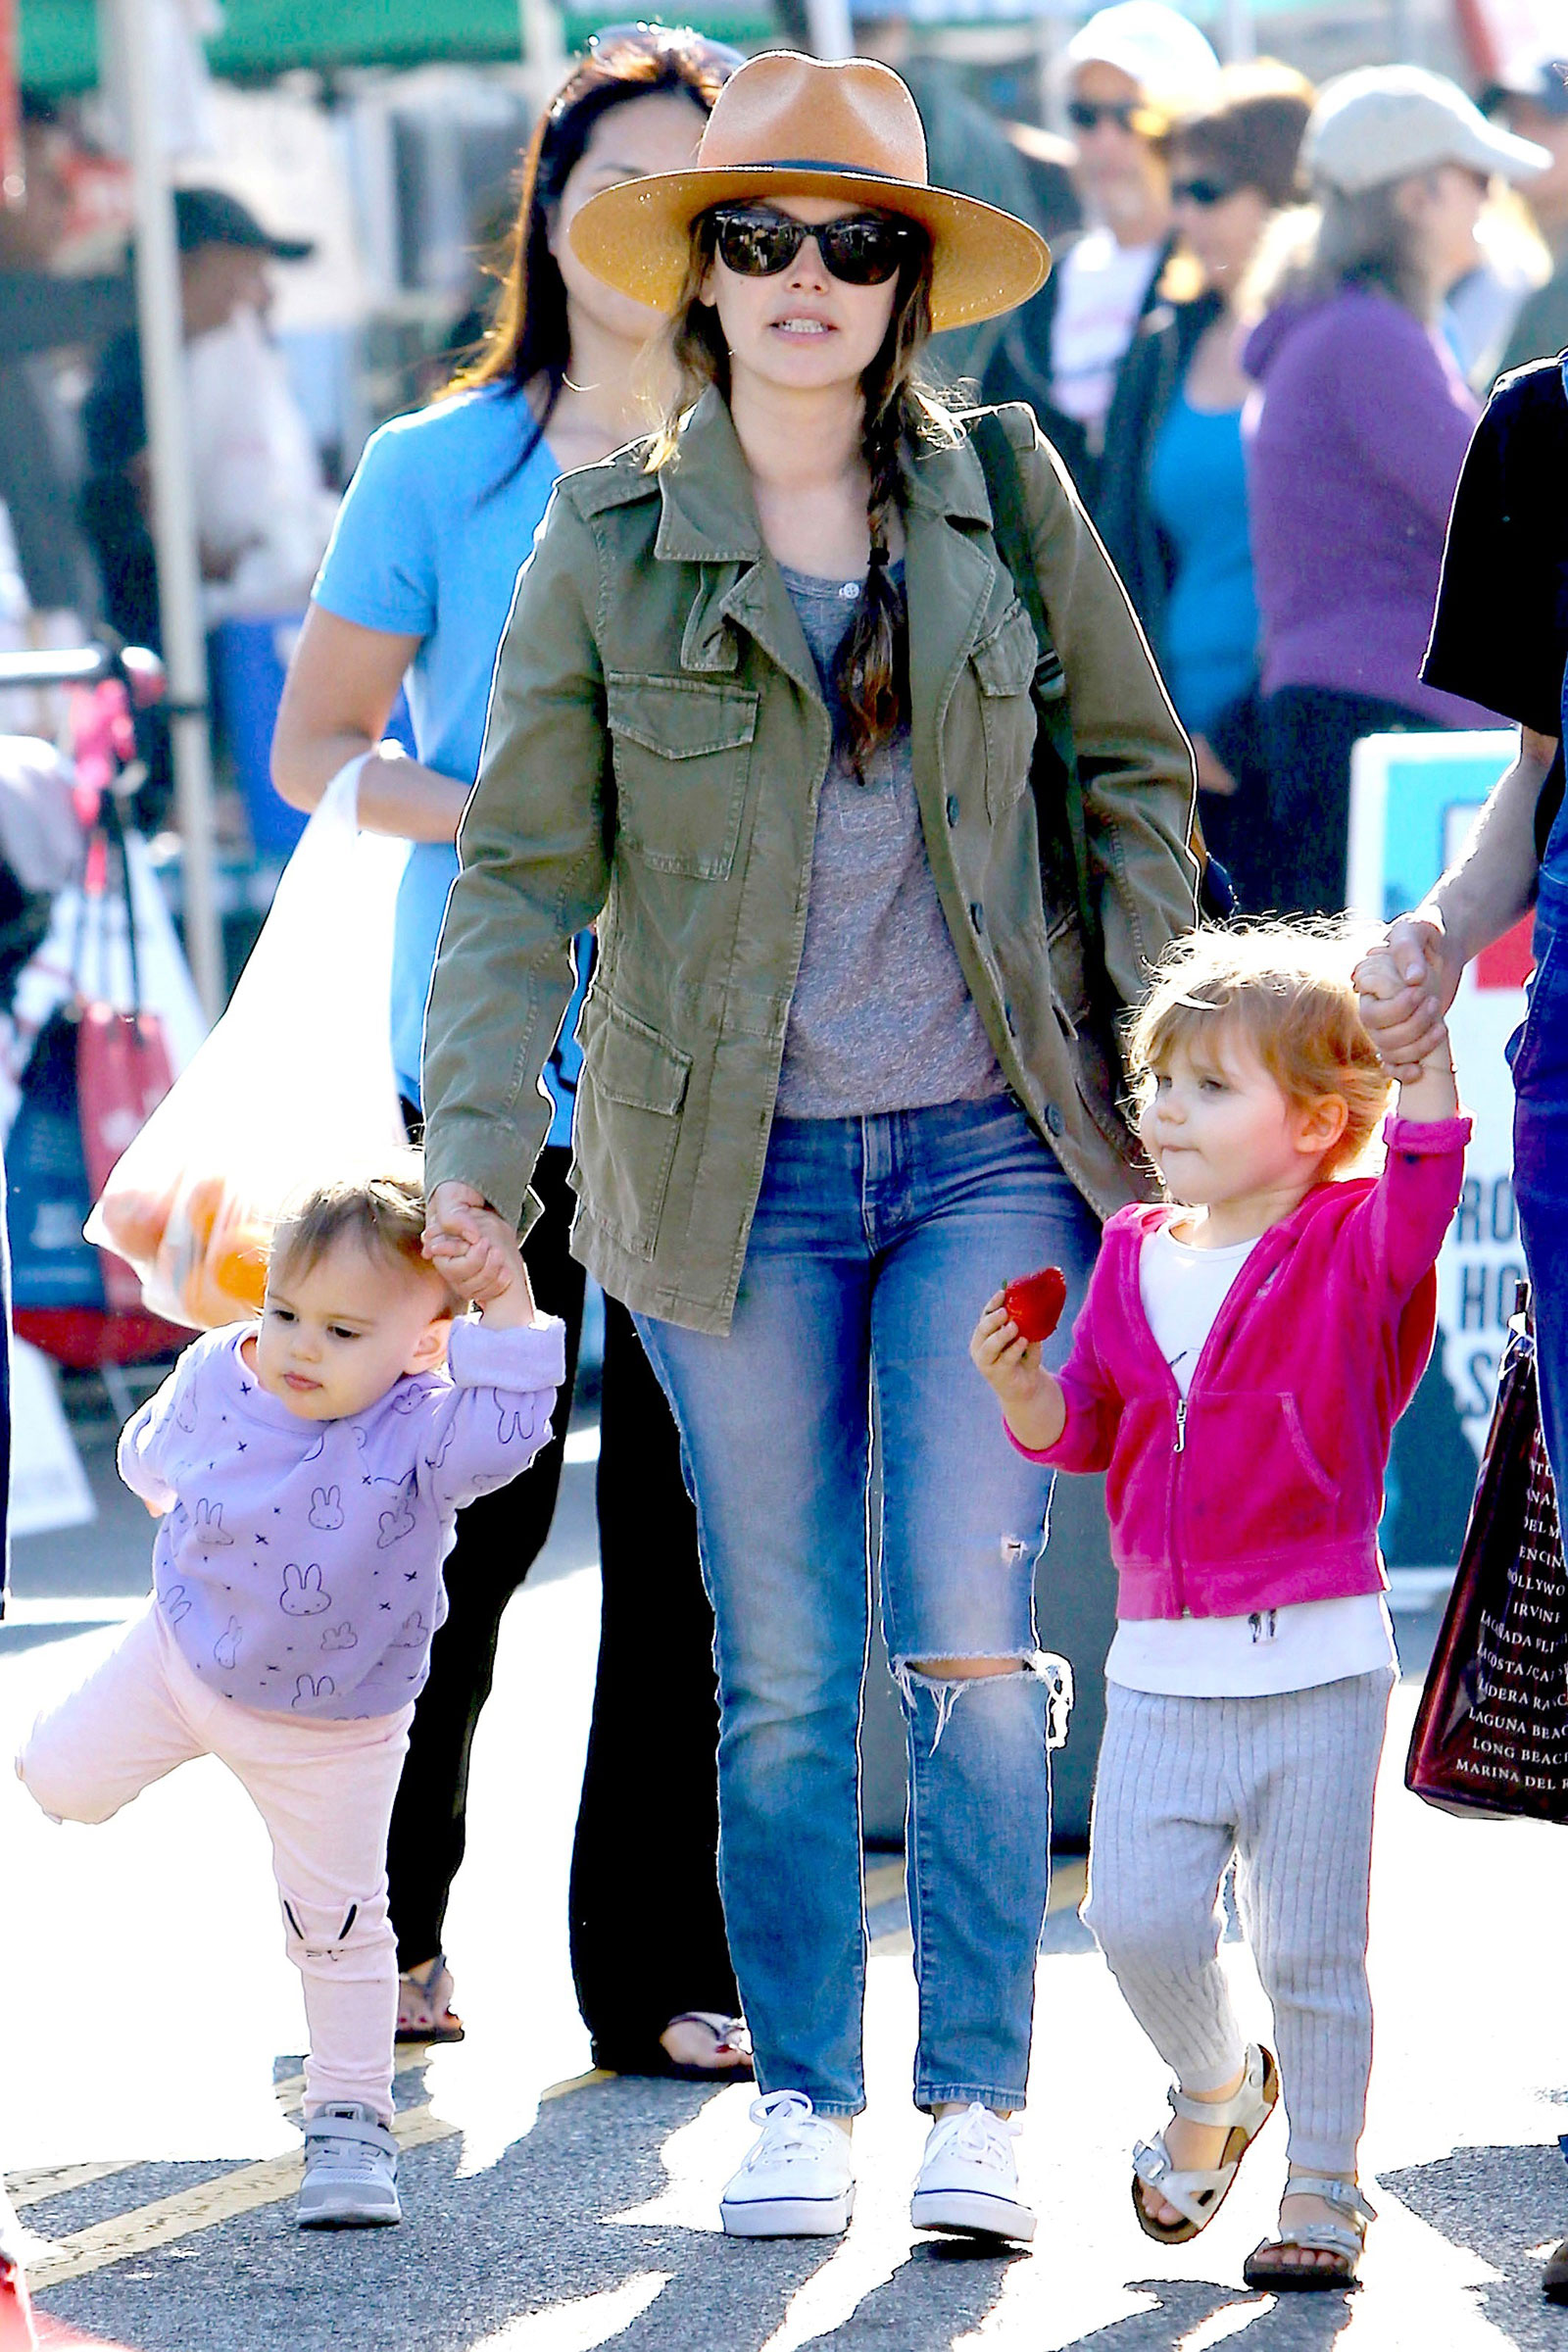 Rachel Bilson's casual mom style is cute and comfy, featuring a utility jacket, ripped jeans and white sneakers.